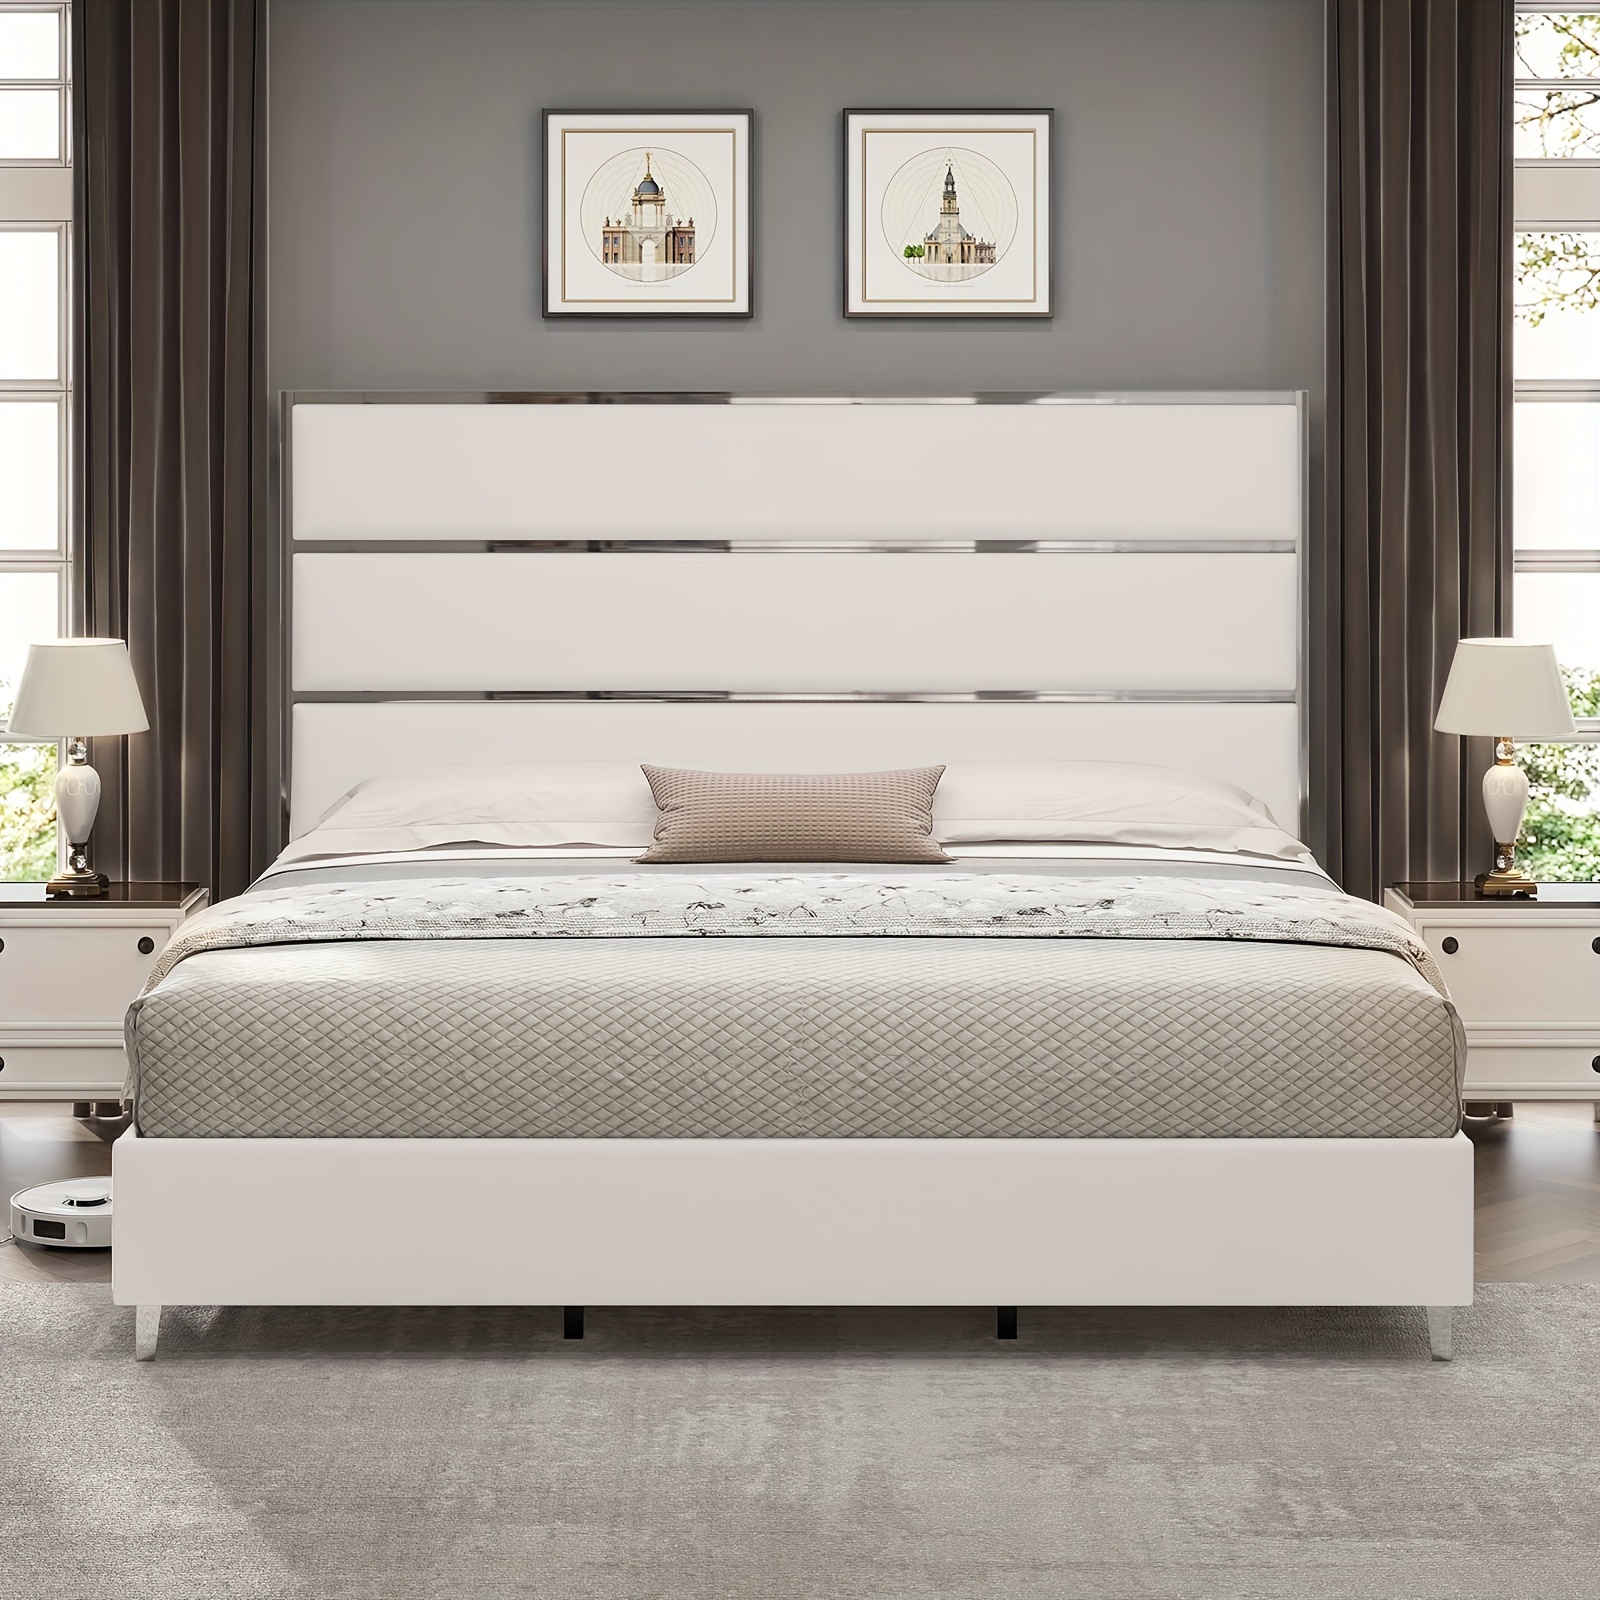 

Upholstered Bed Frame With 59" Tall Headboard, Velvet Platform Bed With Silver Mirrored Trim/no Box Spring Needed